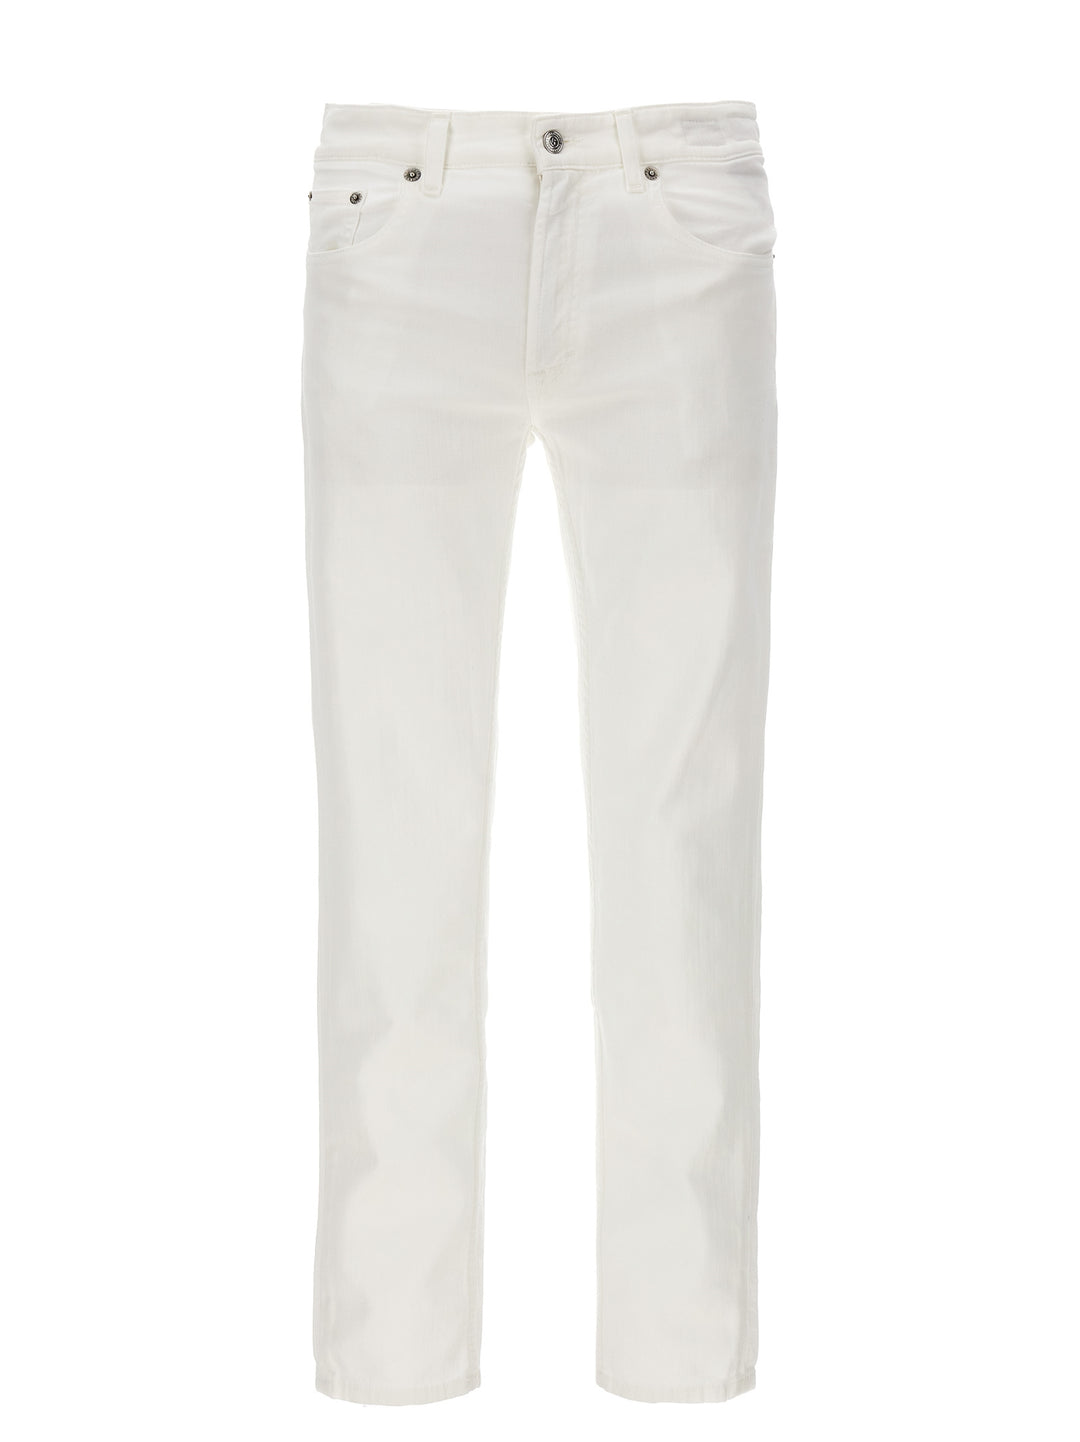 Skeith Jeans Bianco